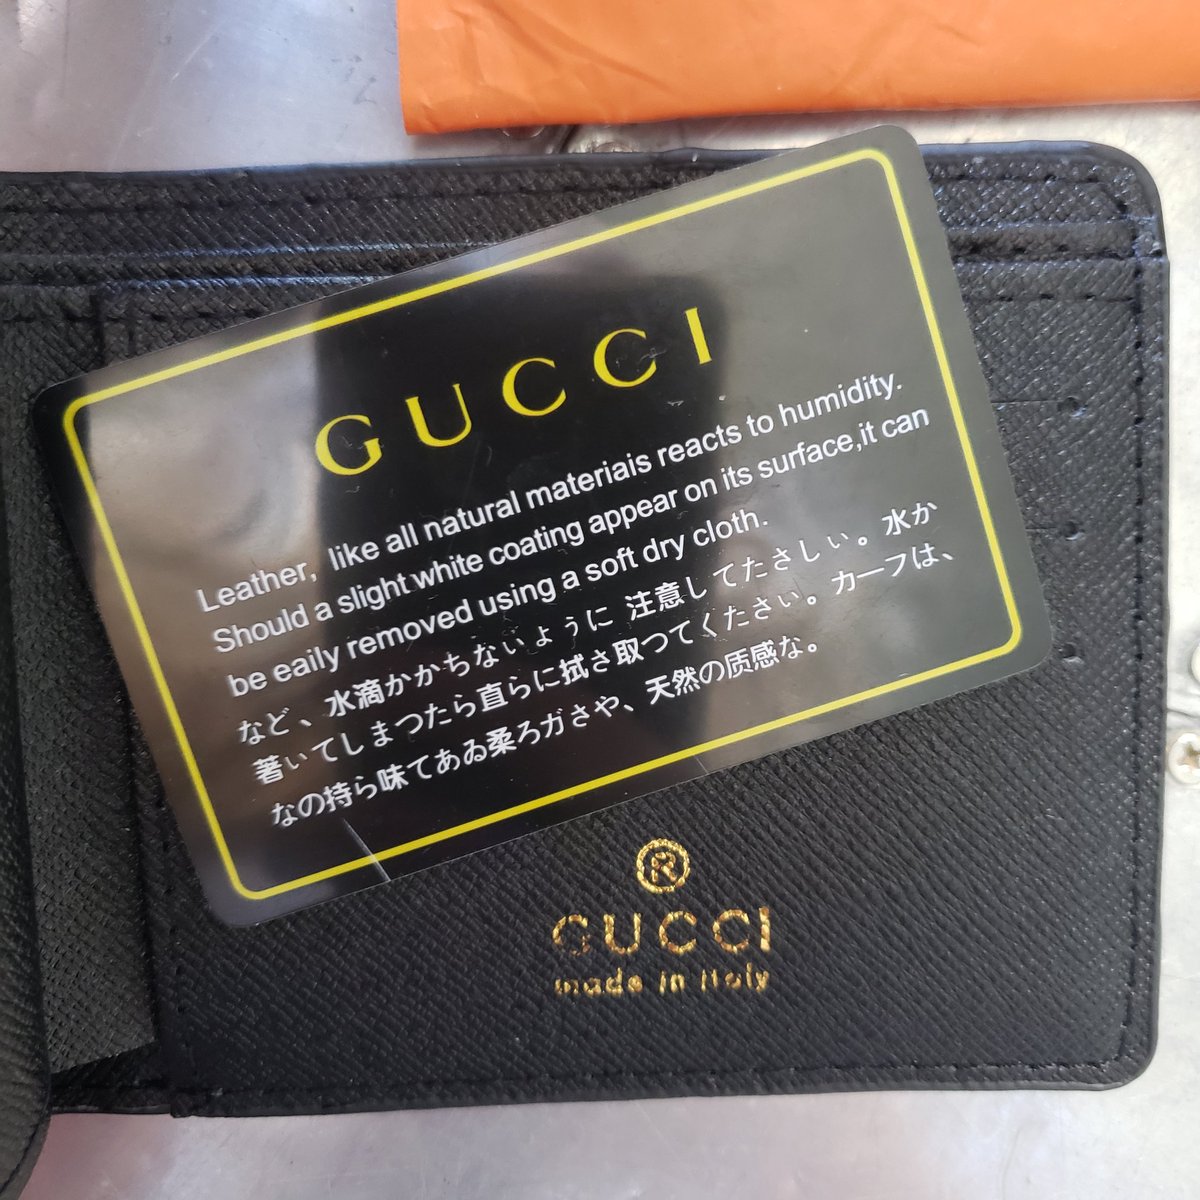 gucci made in